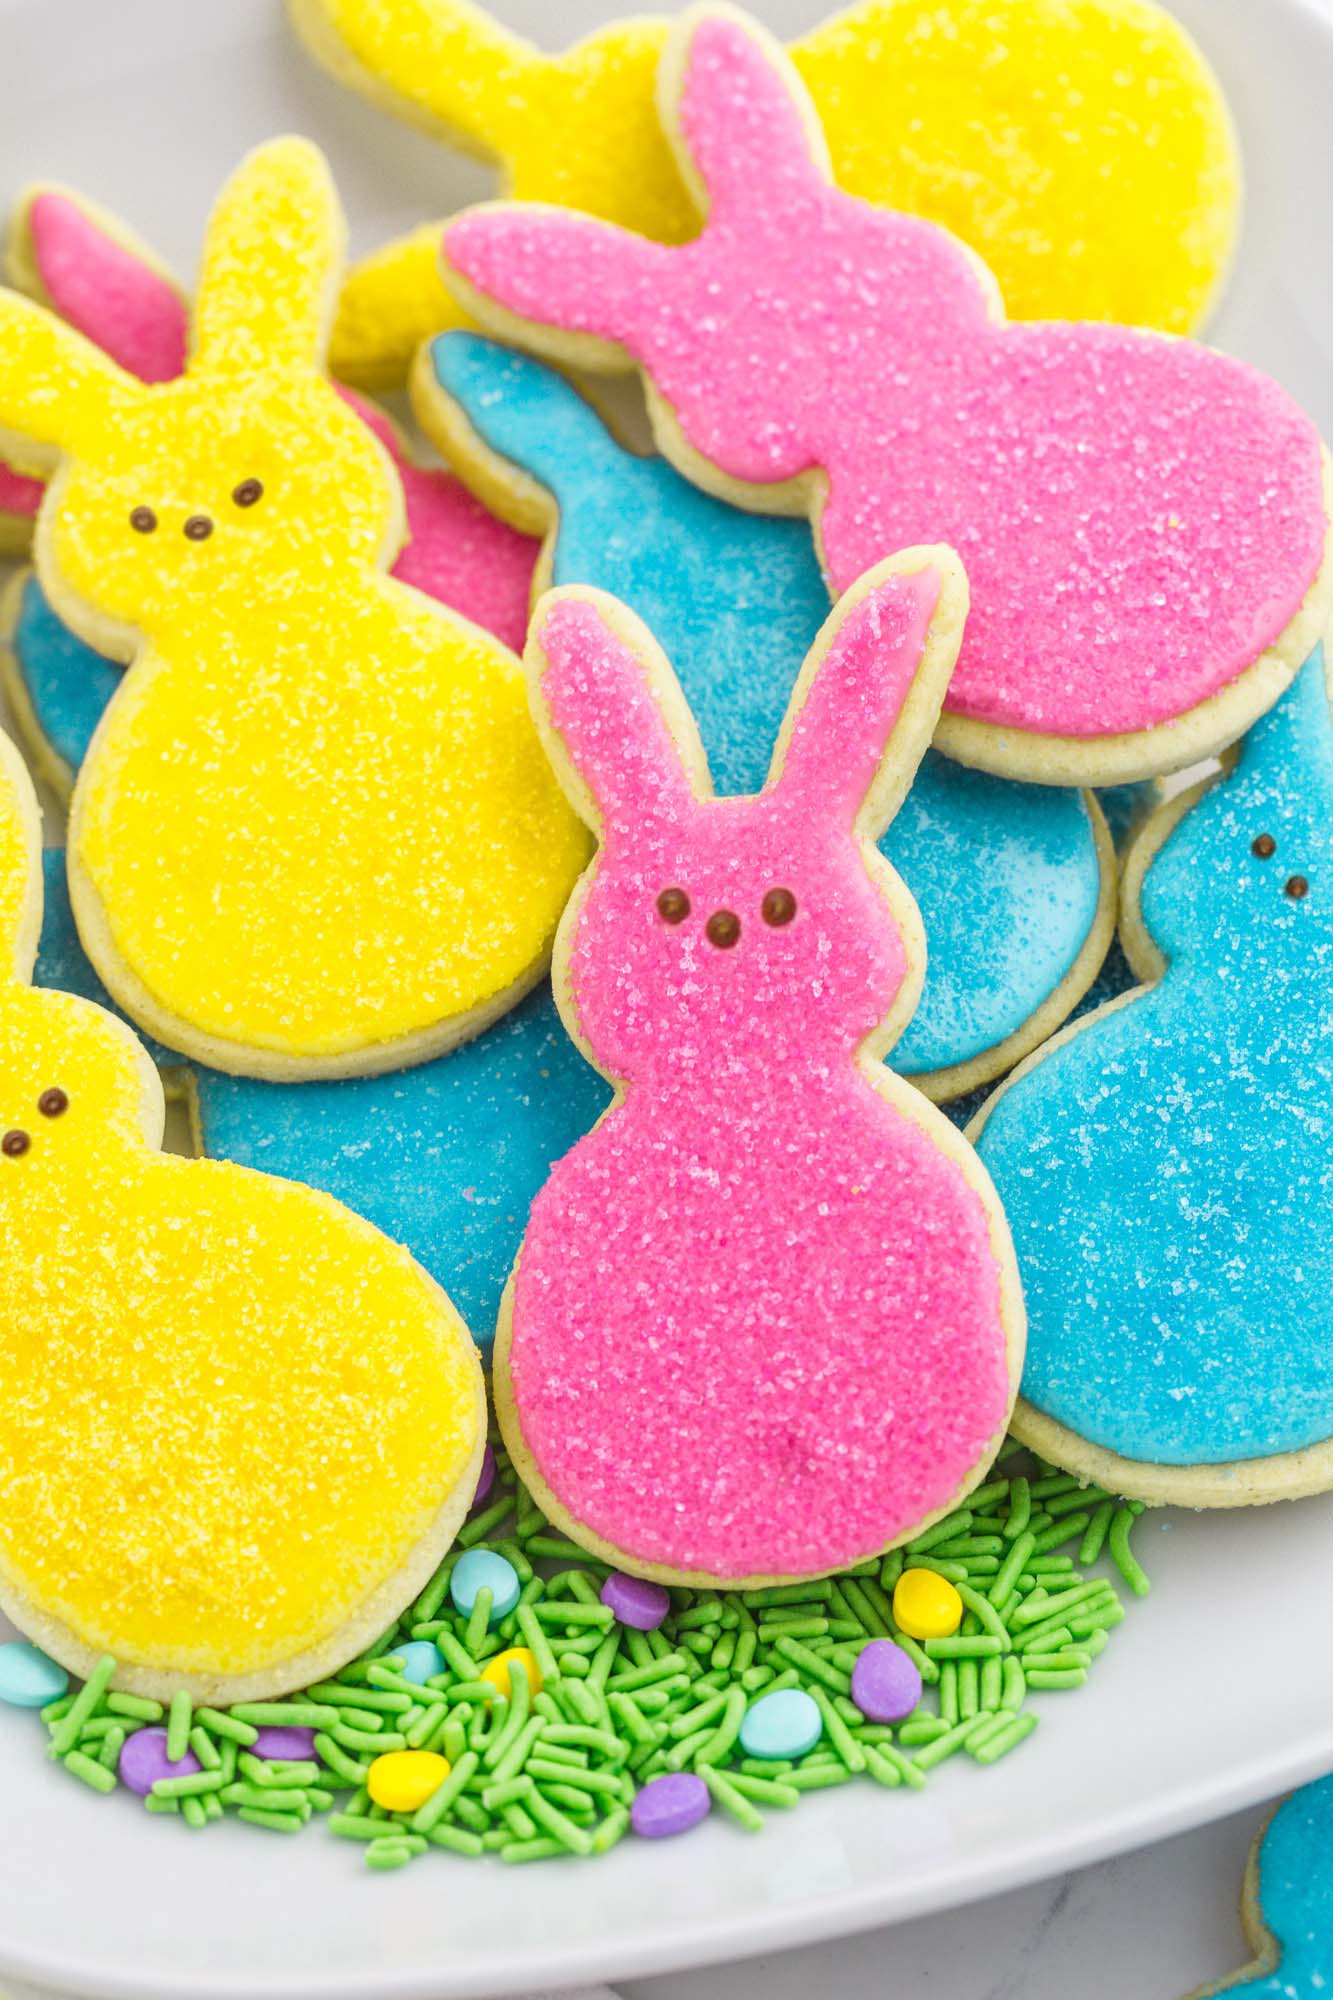 easter bunny cookies decorated with pink, blue, and yellow icing and sugar with peeps bunny faces, on a platter lined with green easter sprinkles.